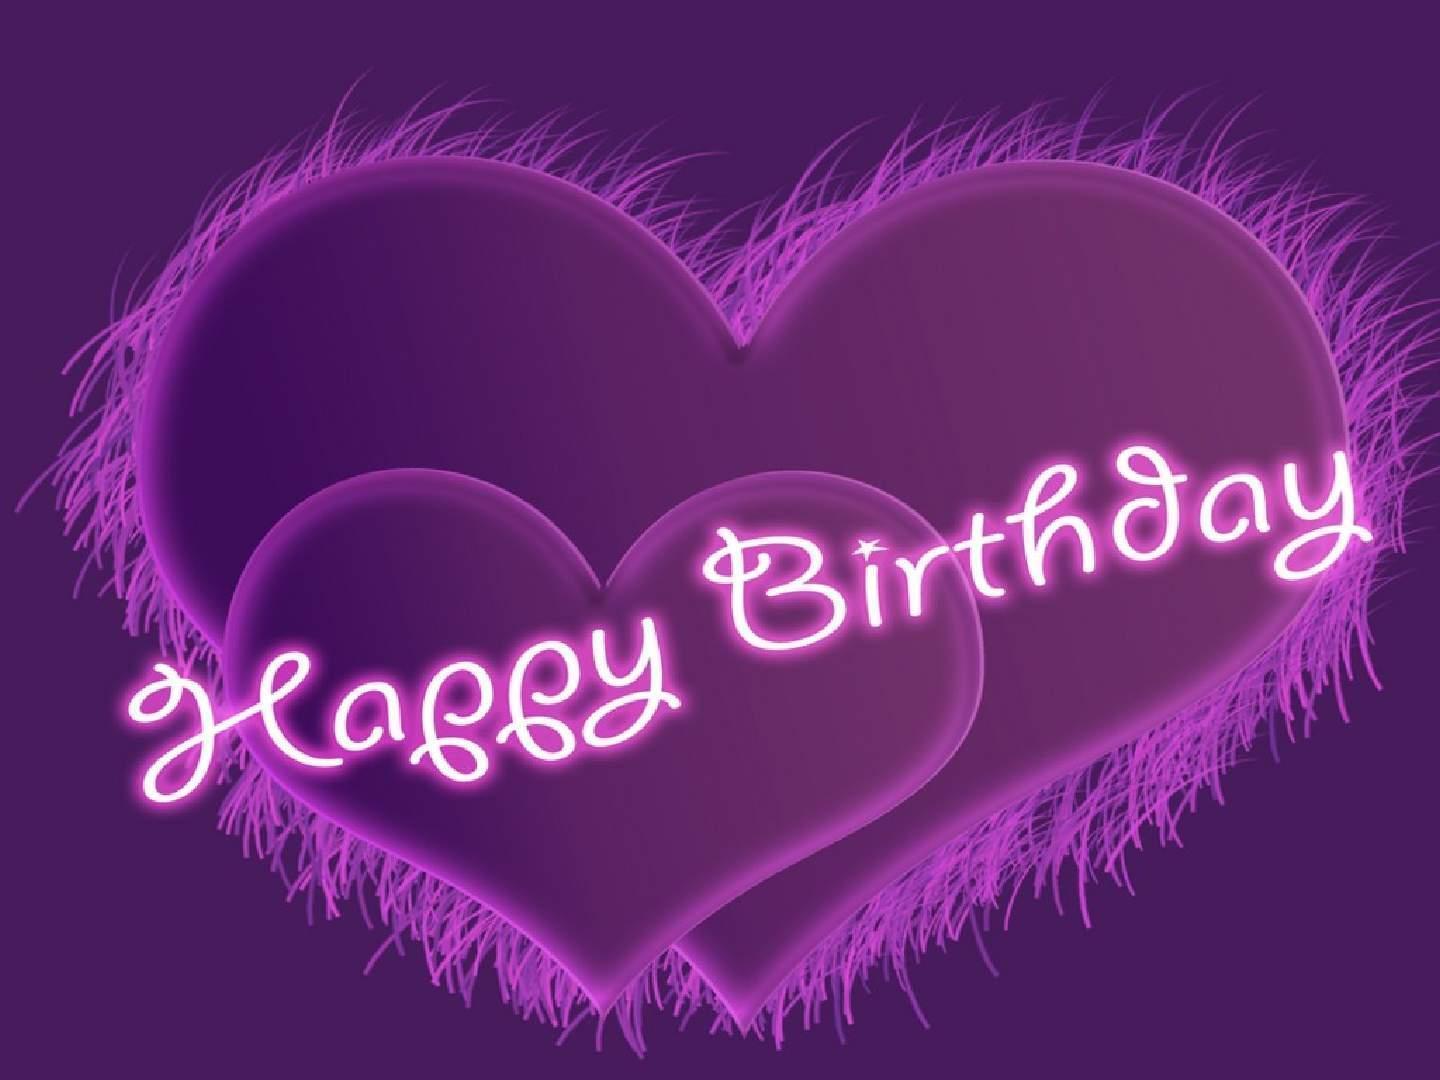 Birth day Greetings Love Wishes Card free desktop background